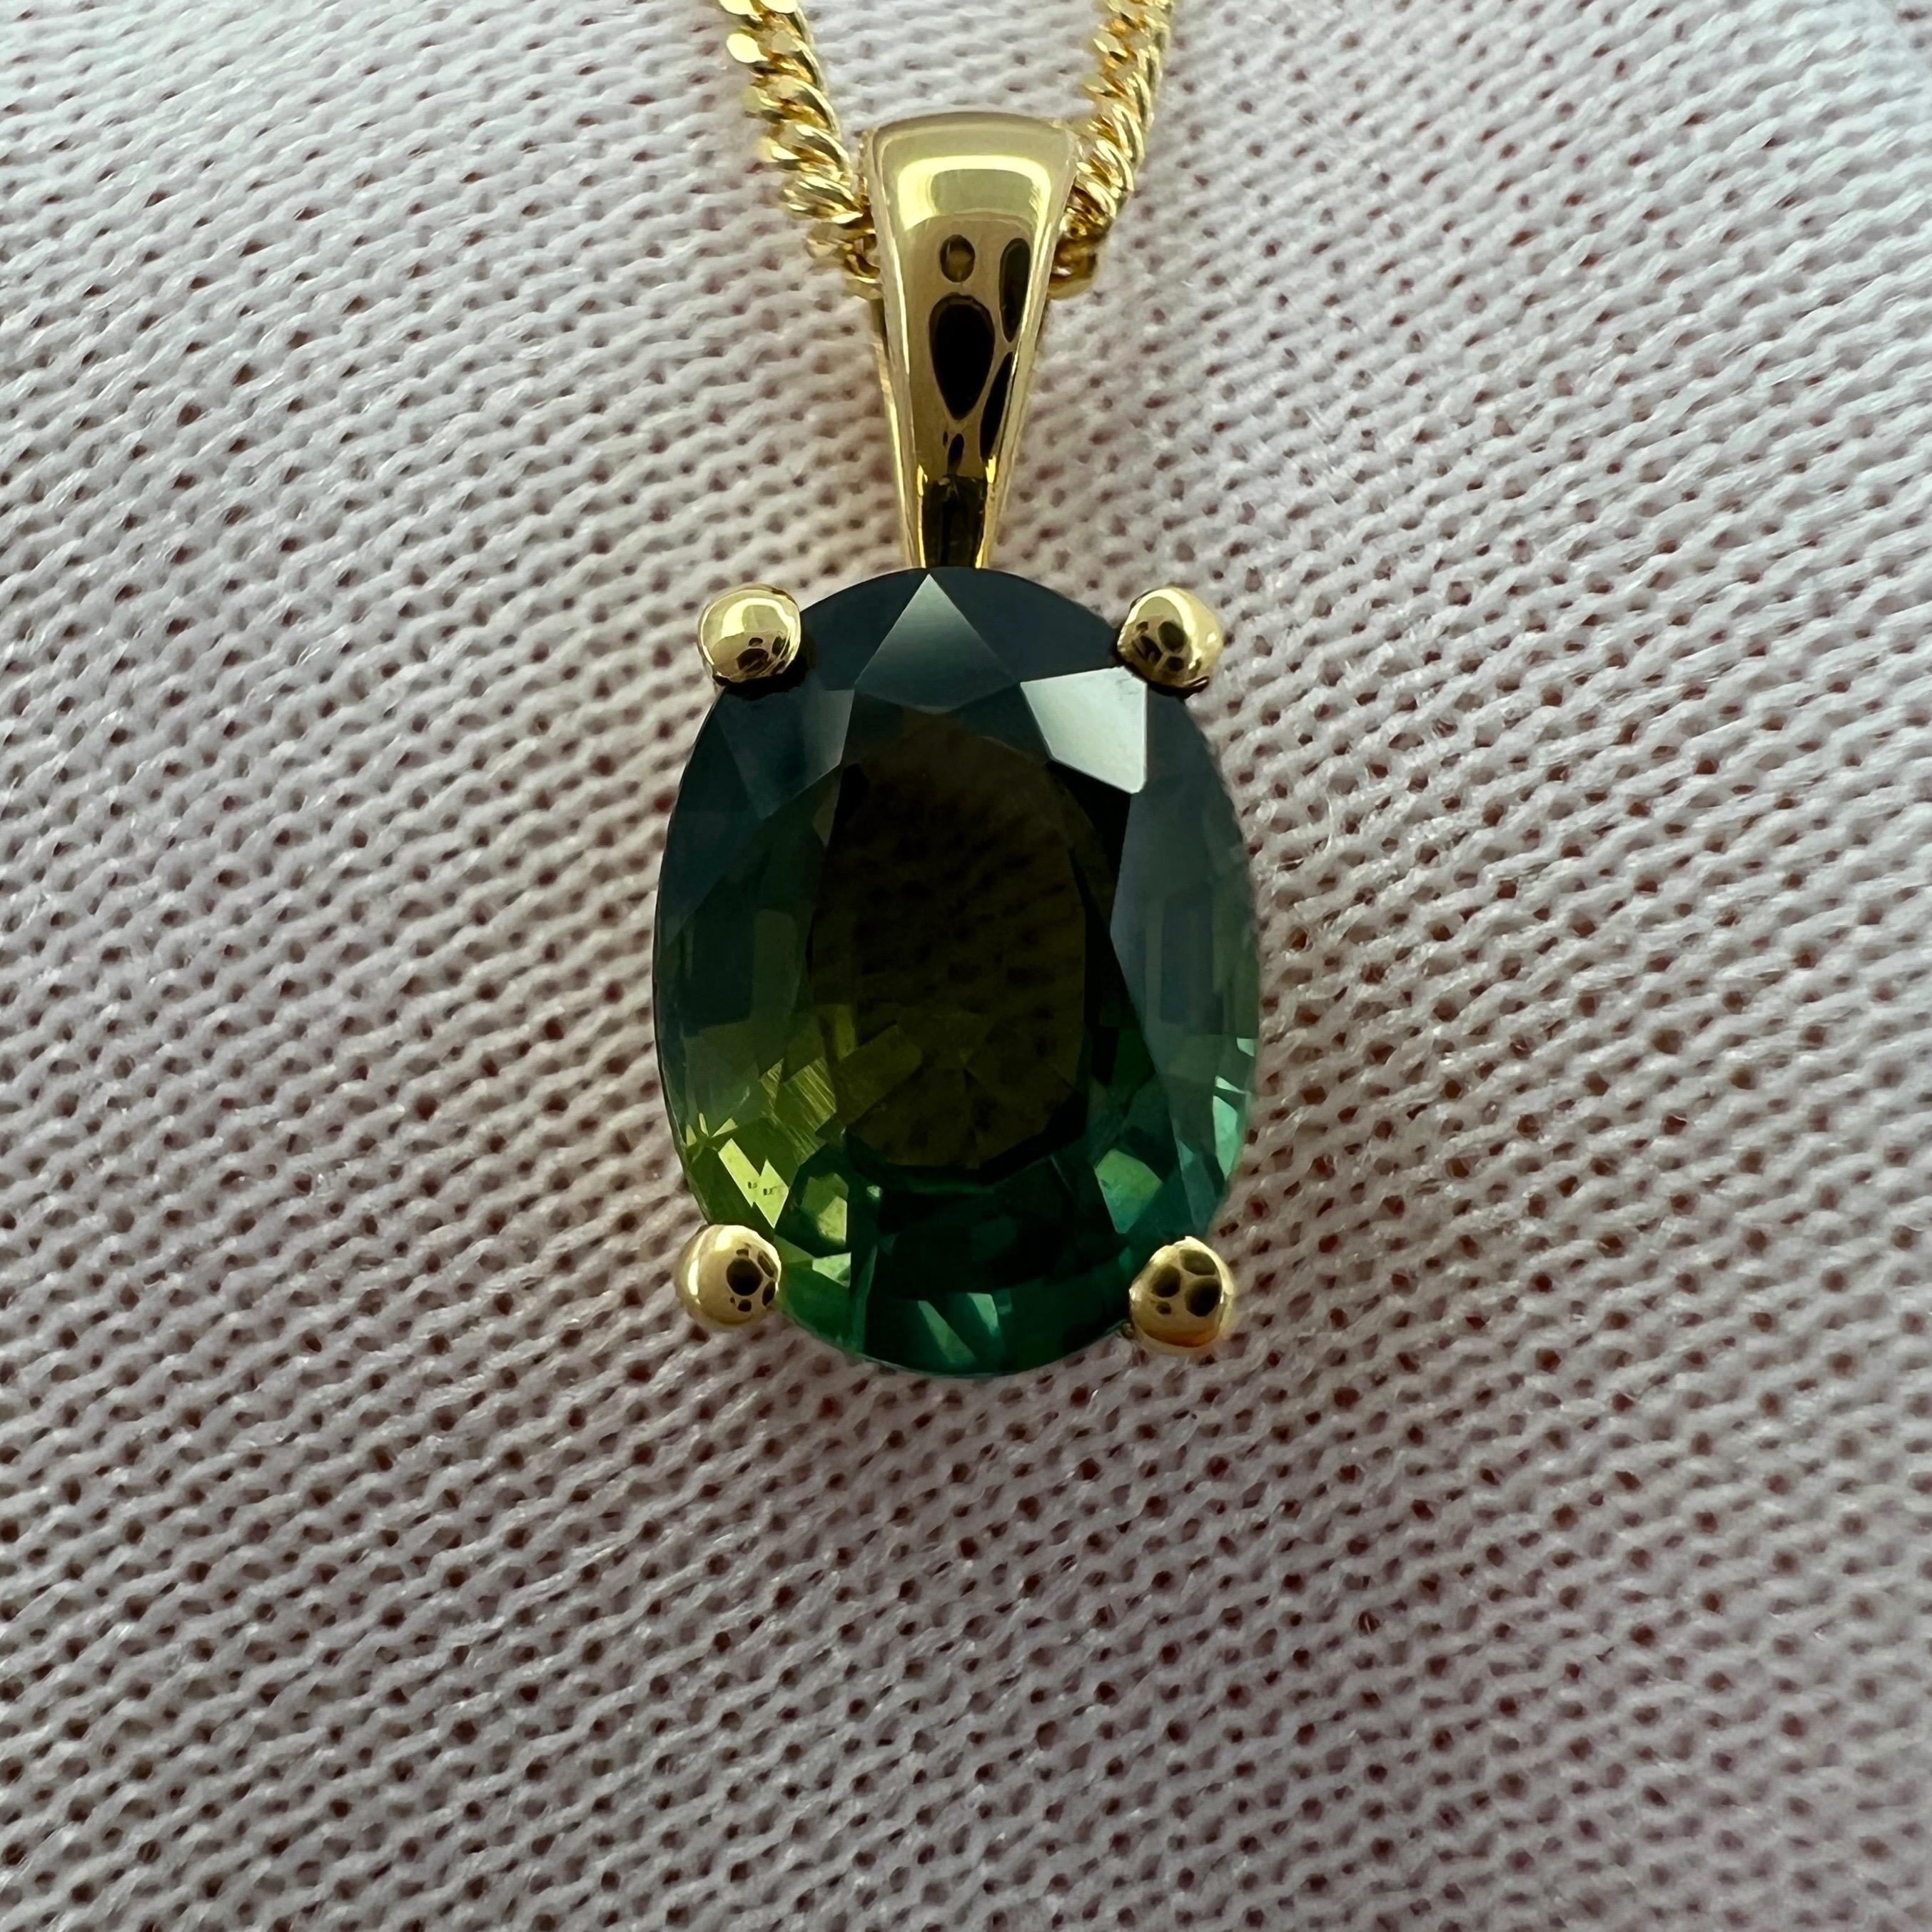 Vivid Green Australian Sapphire 18k Yellow Gold Solitaire Pendant.

1.60 Carat sapphire with a beautiful vivid green colour and excellent clarity. Very clean stone VVS. Also has an excellent oval cut. Measures 8x6mm.

Set in a stunning 18k yellow